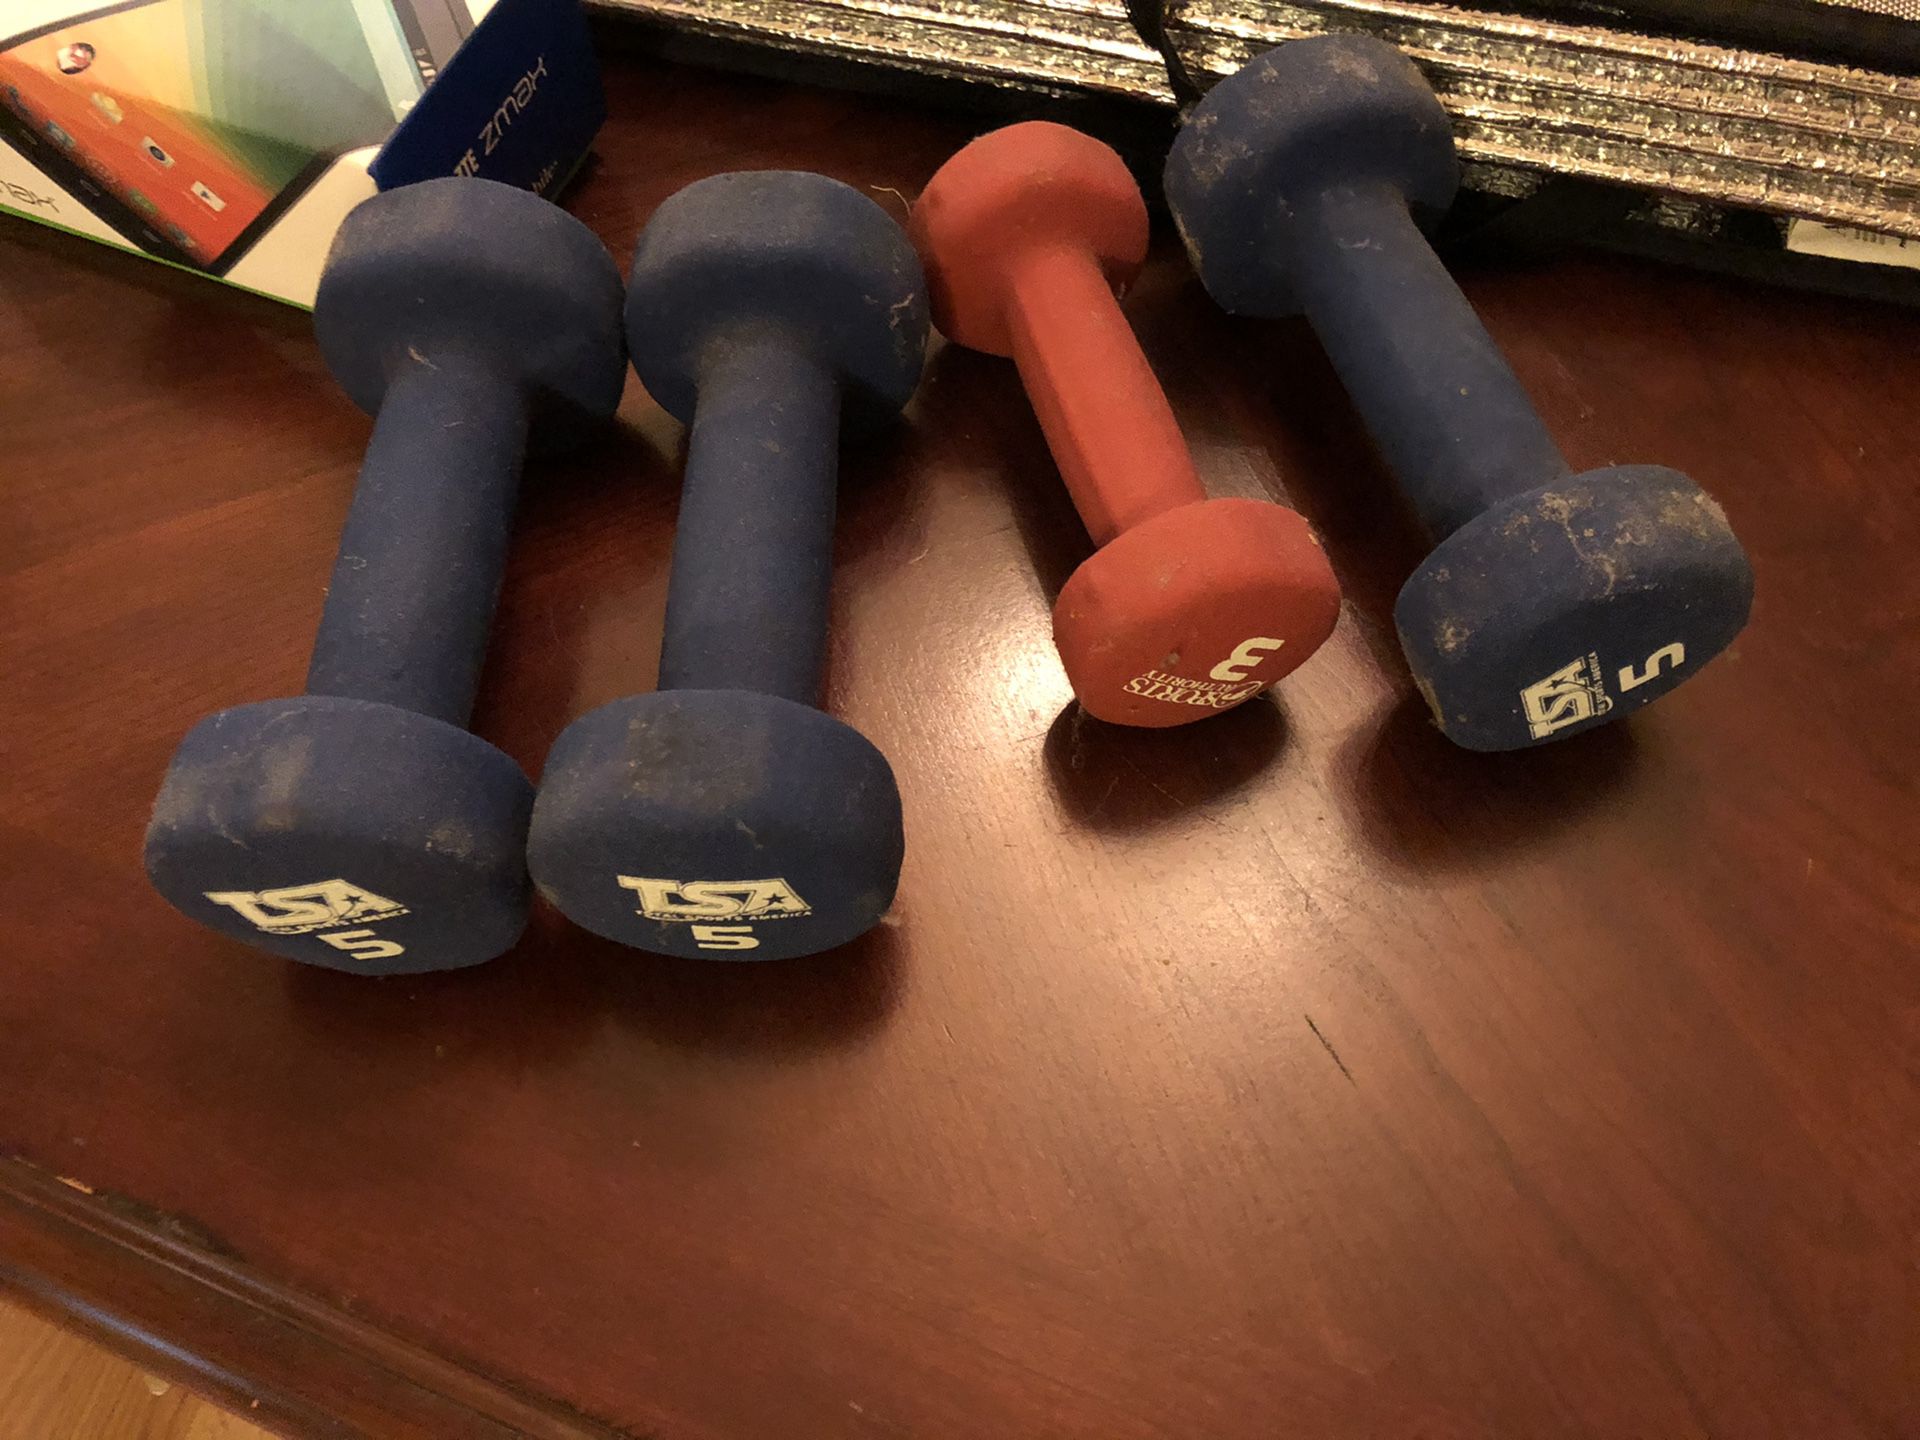 Dumbell Weights (3x5lbs, 1x 3lbs)